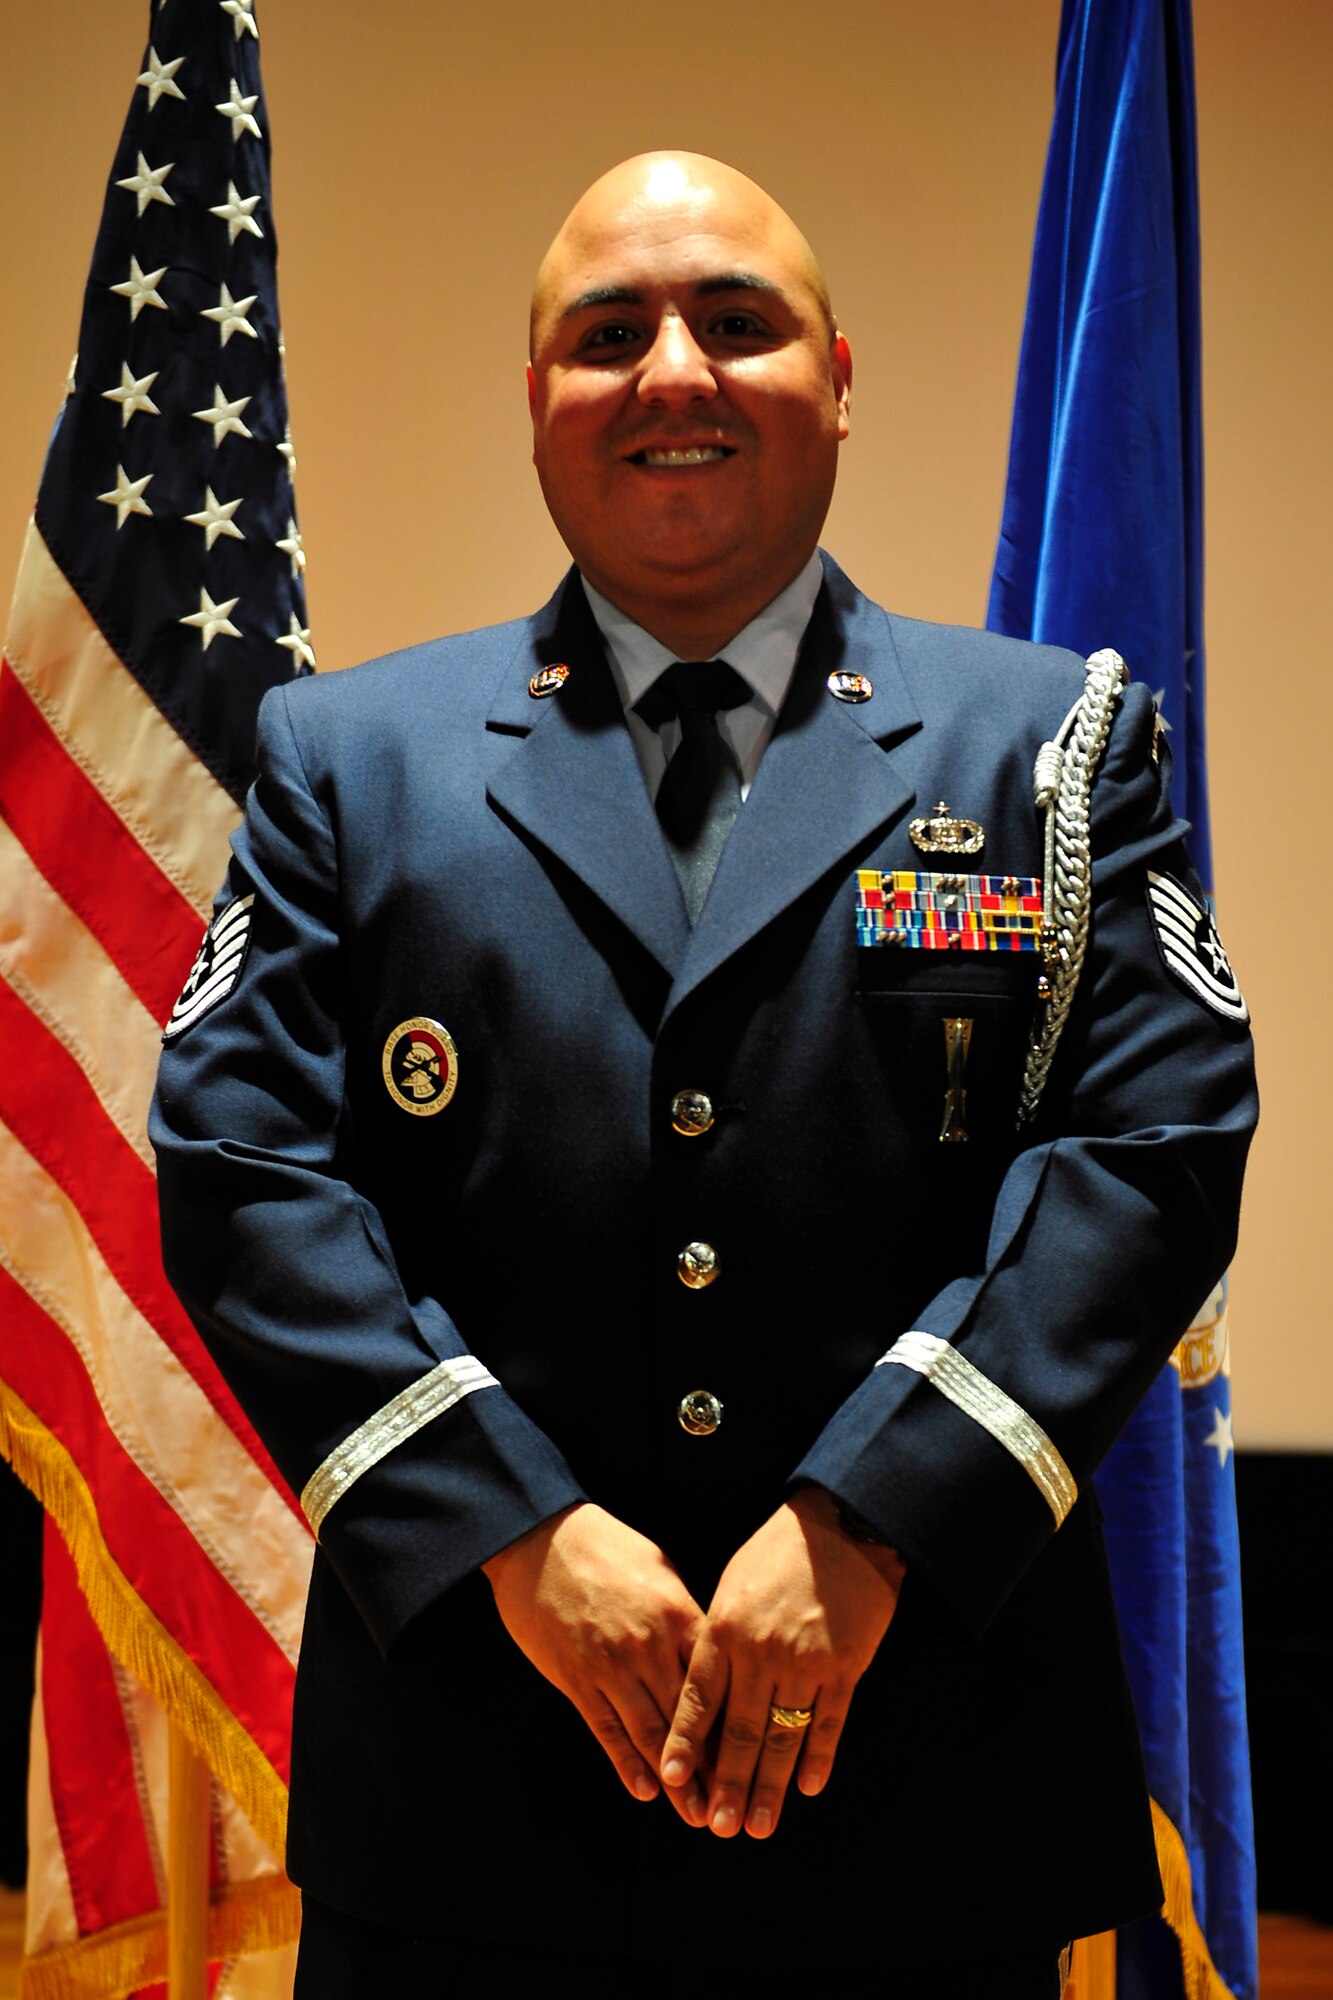 U.S. Air Force Tech. Sgt. Richard Vasquez, Jr., Air Combat Command Heritage Band of America vocalist and base honor guard manager, stands at ceremonial parade rest after an honor guard graduation at Langley Air Force Base, Va., Nov. 10, 2015. As a base honor guard manager, Vasquez is in charge of making sure the honor guard members are “sharp, crisp and motionless,” as stated in their creed. (U.S. Air Force photo by Senior Airman Breonna Veal)